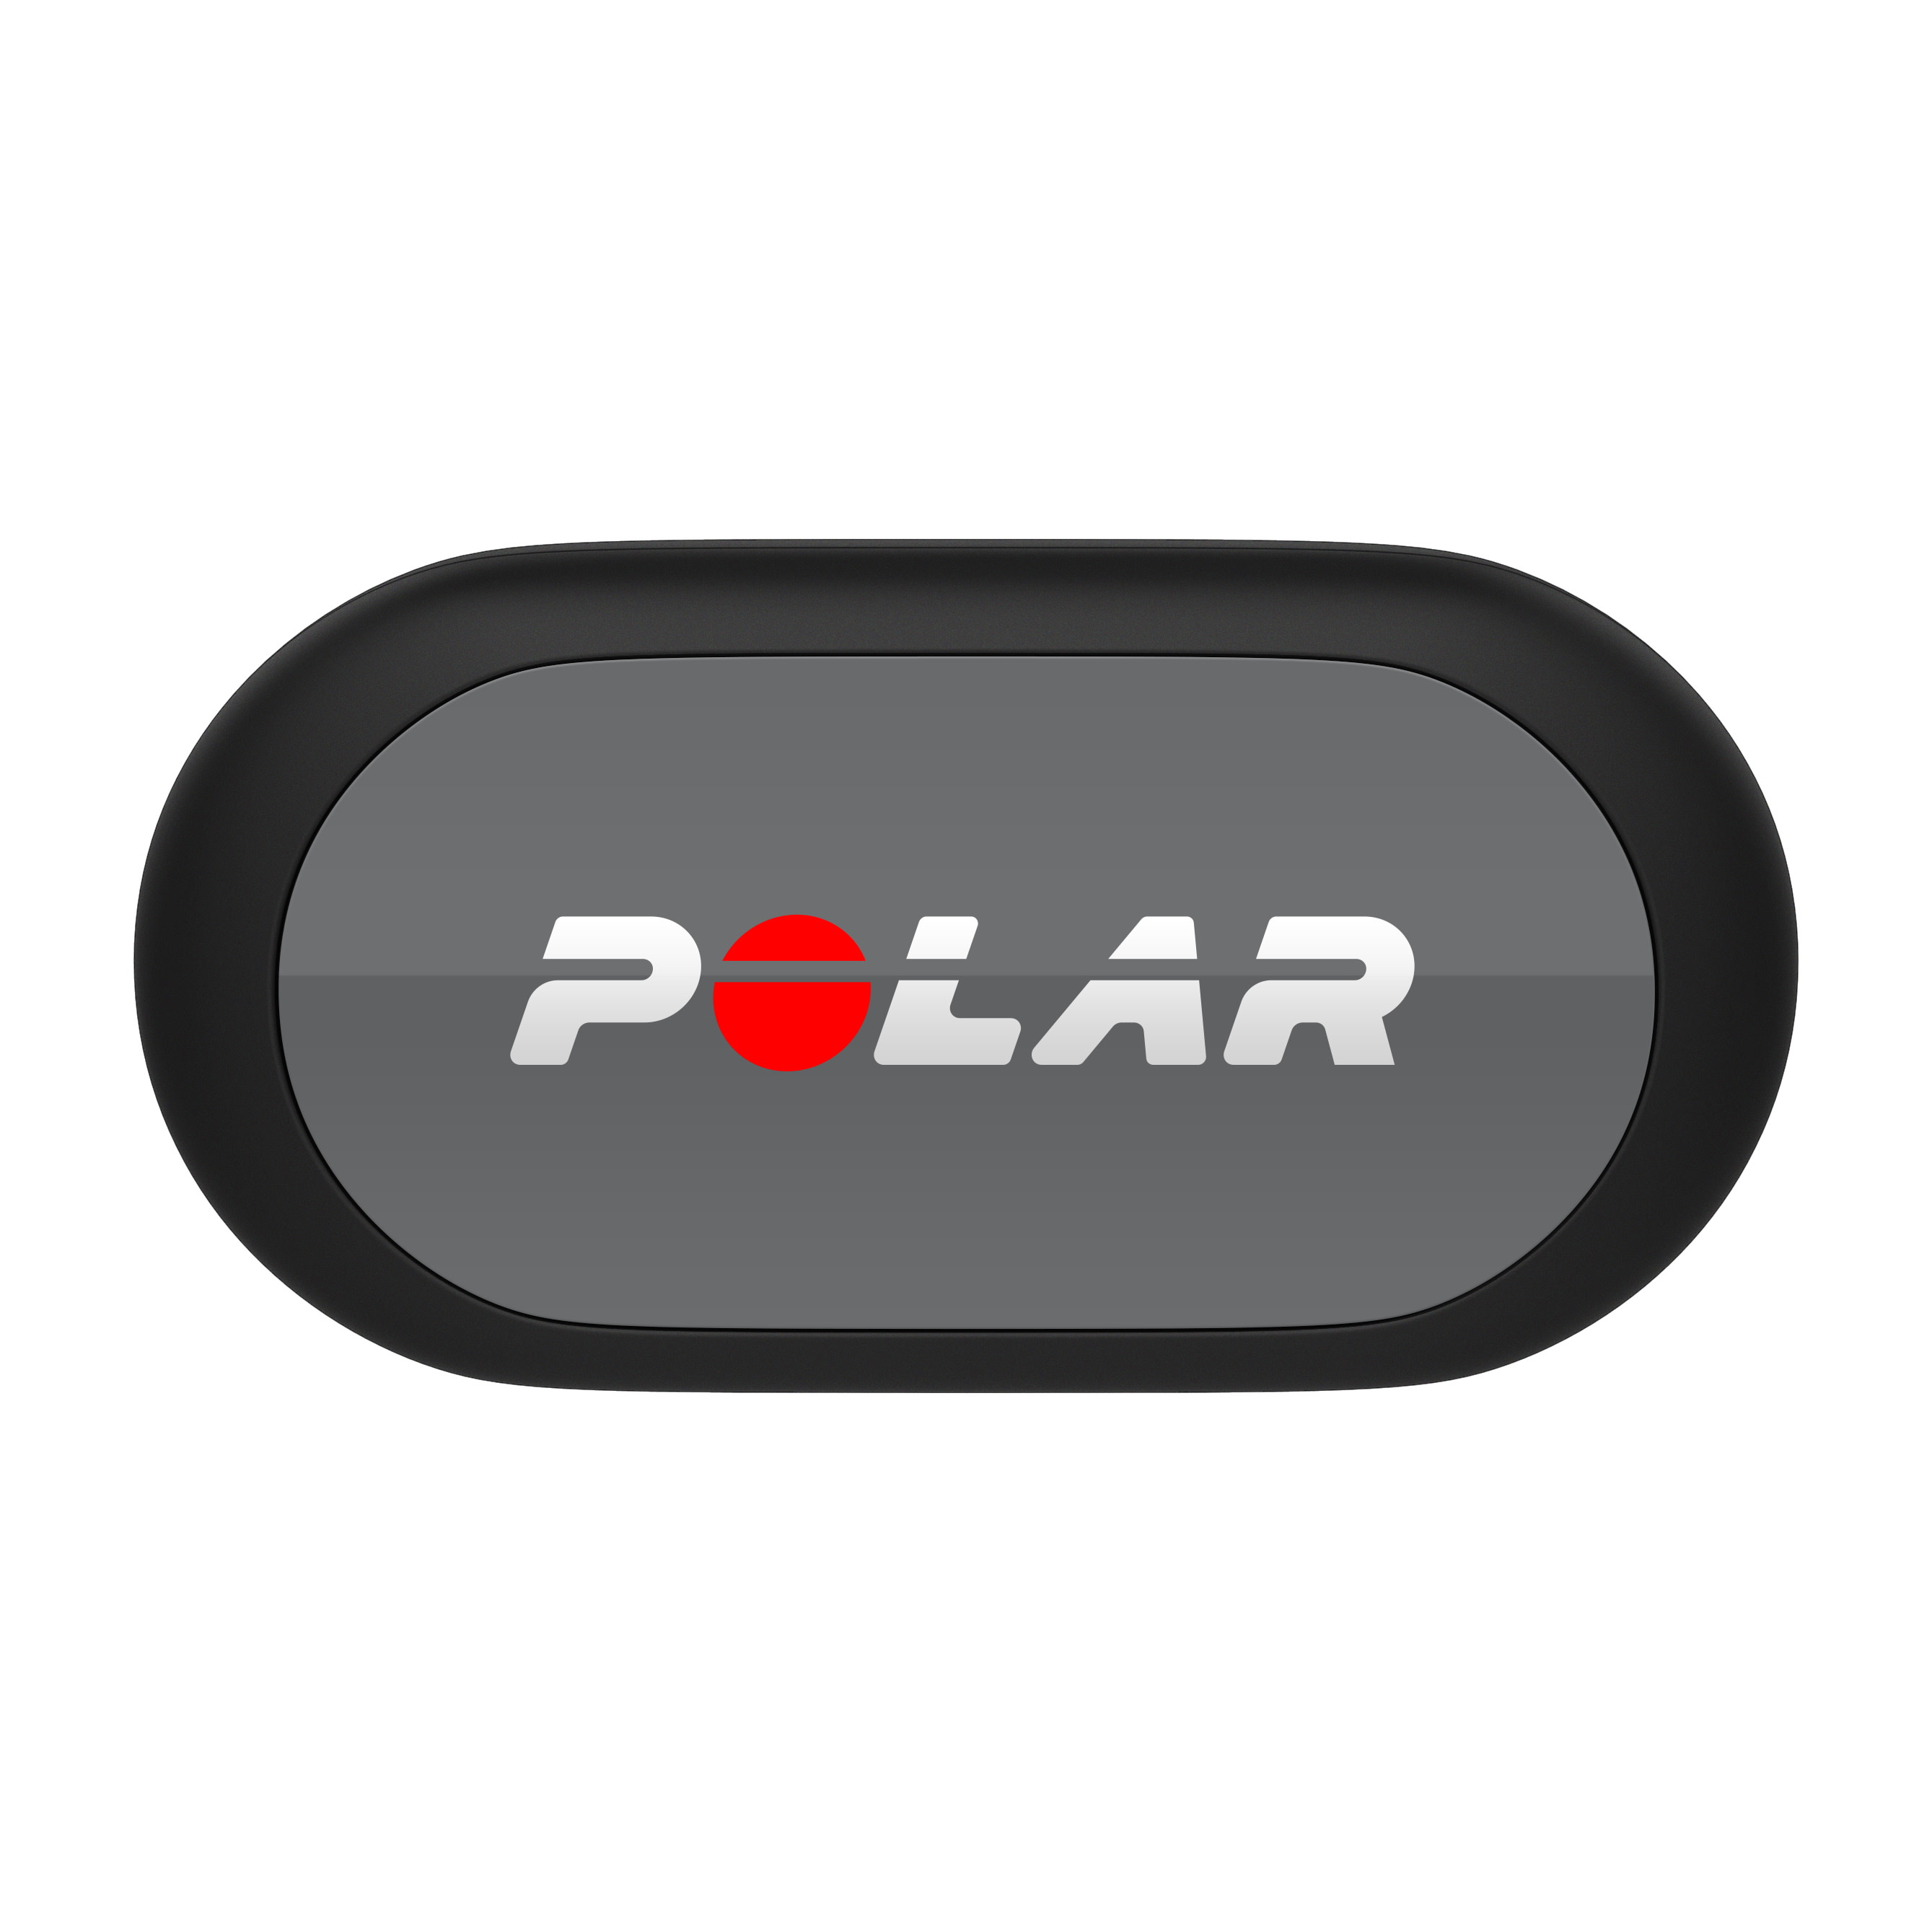 Polar H9 Review: Get the most out of your workouts